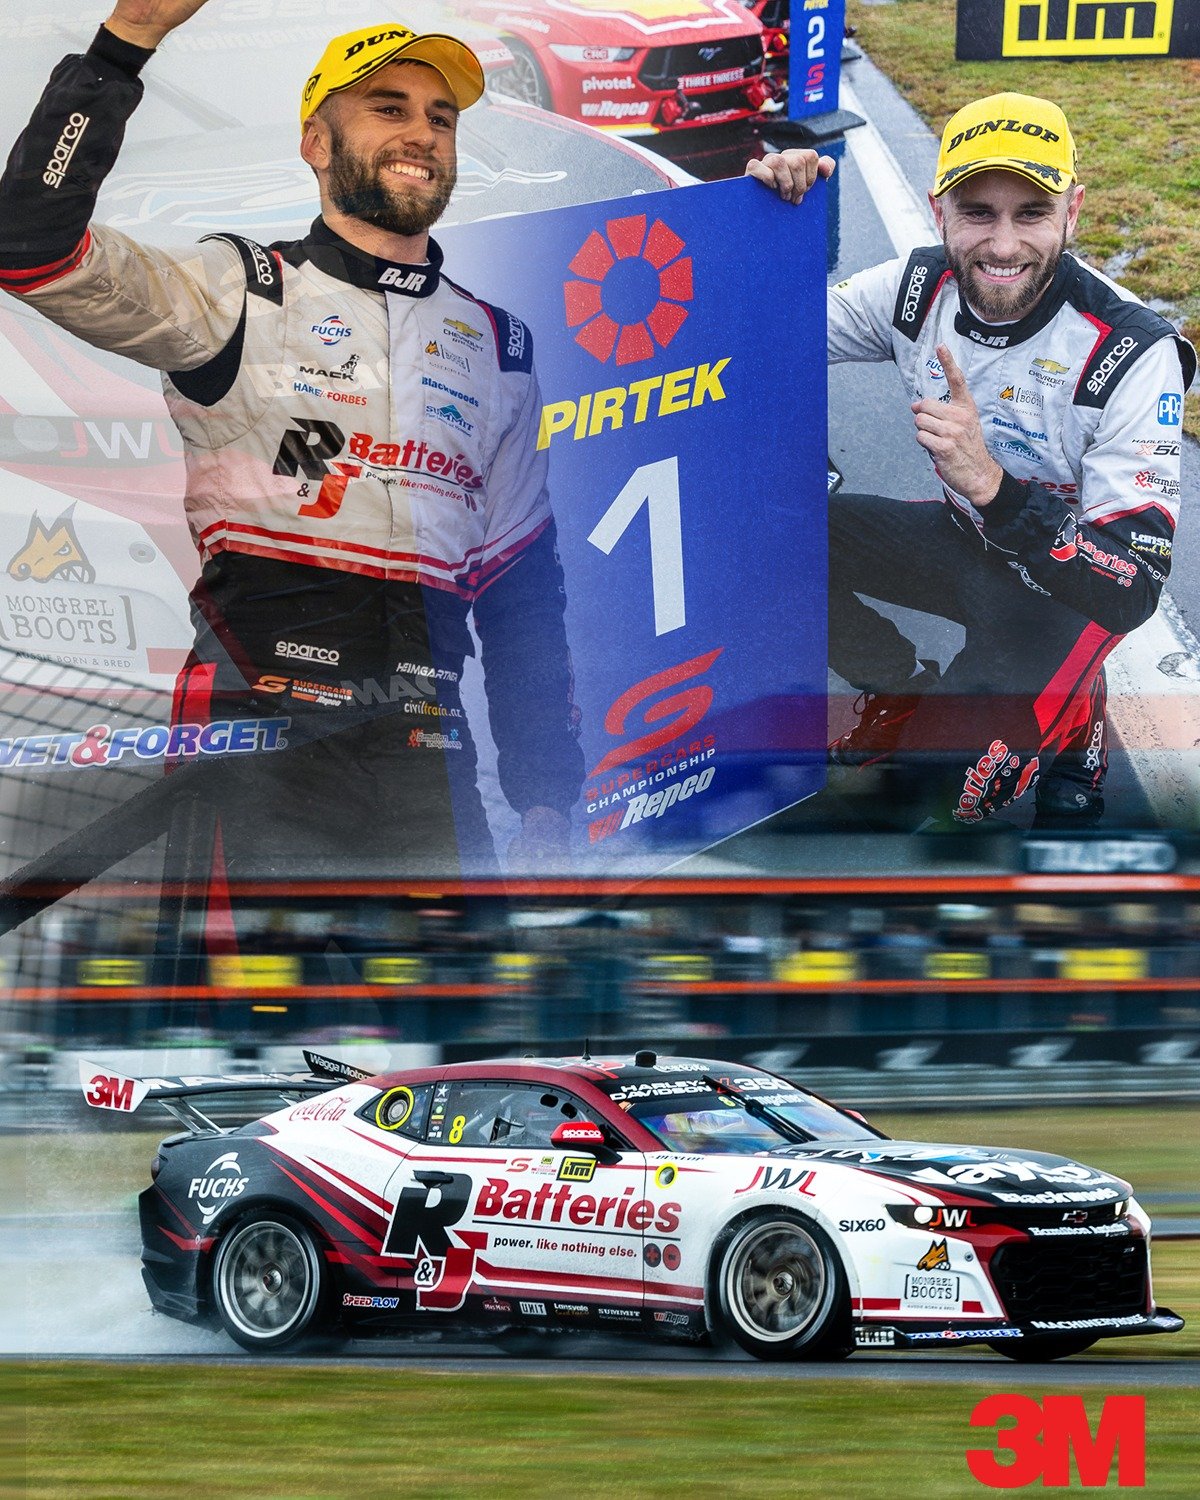 #AD

@3mfilmsanz keeping @andreheimgartner &rsquo;s machine looking podium ready in all conditions.

We&rsquo;re so grateful for the support of our partners 3M. 3M is our preferred choice of all Digital Wrap film and meets our strenuous requirements 